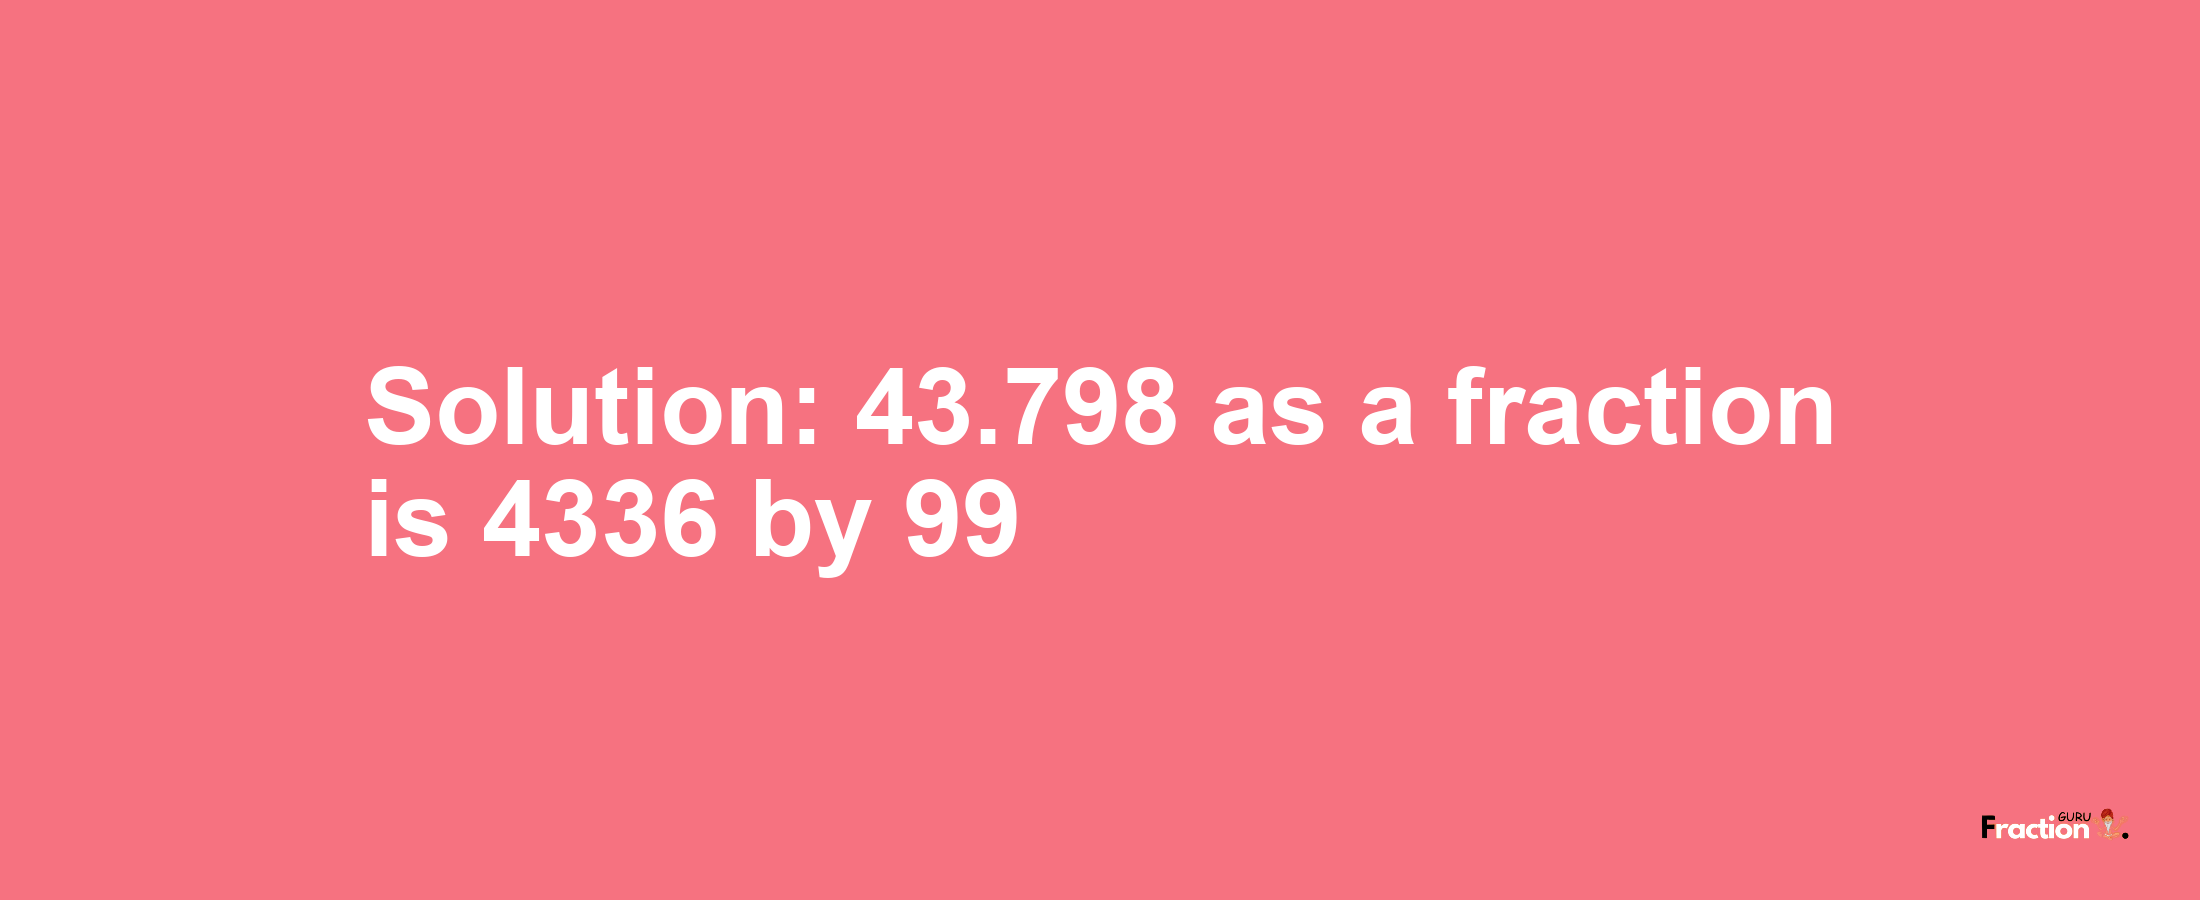 Solution:43.798 as a fraction is 4336/99